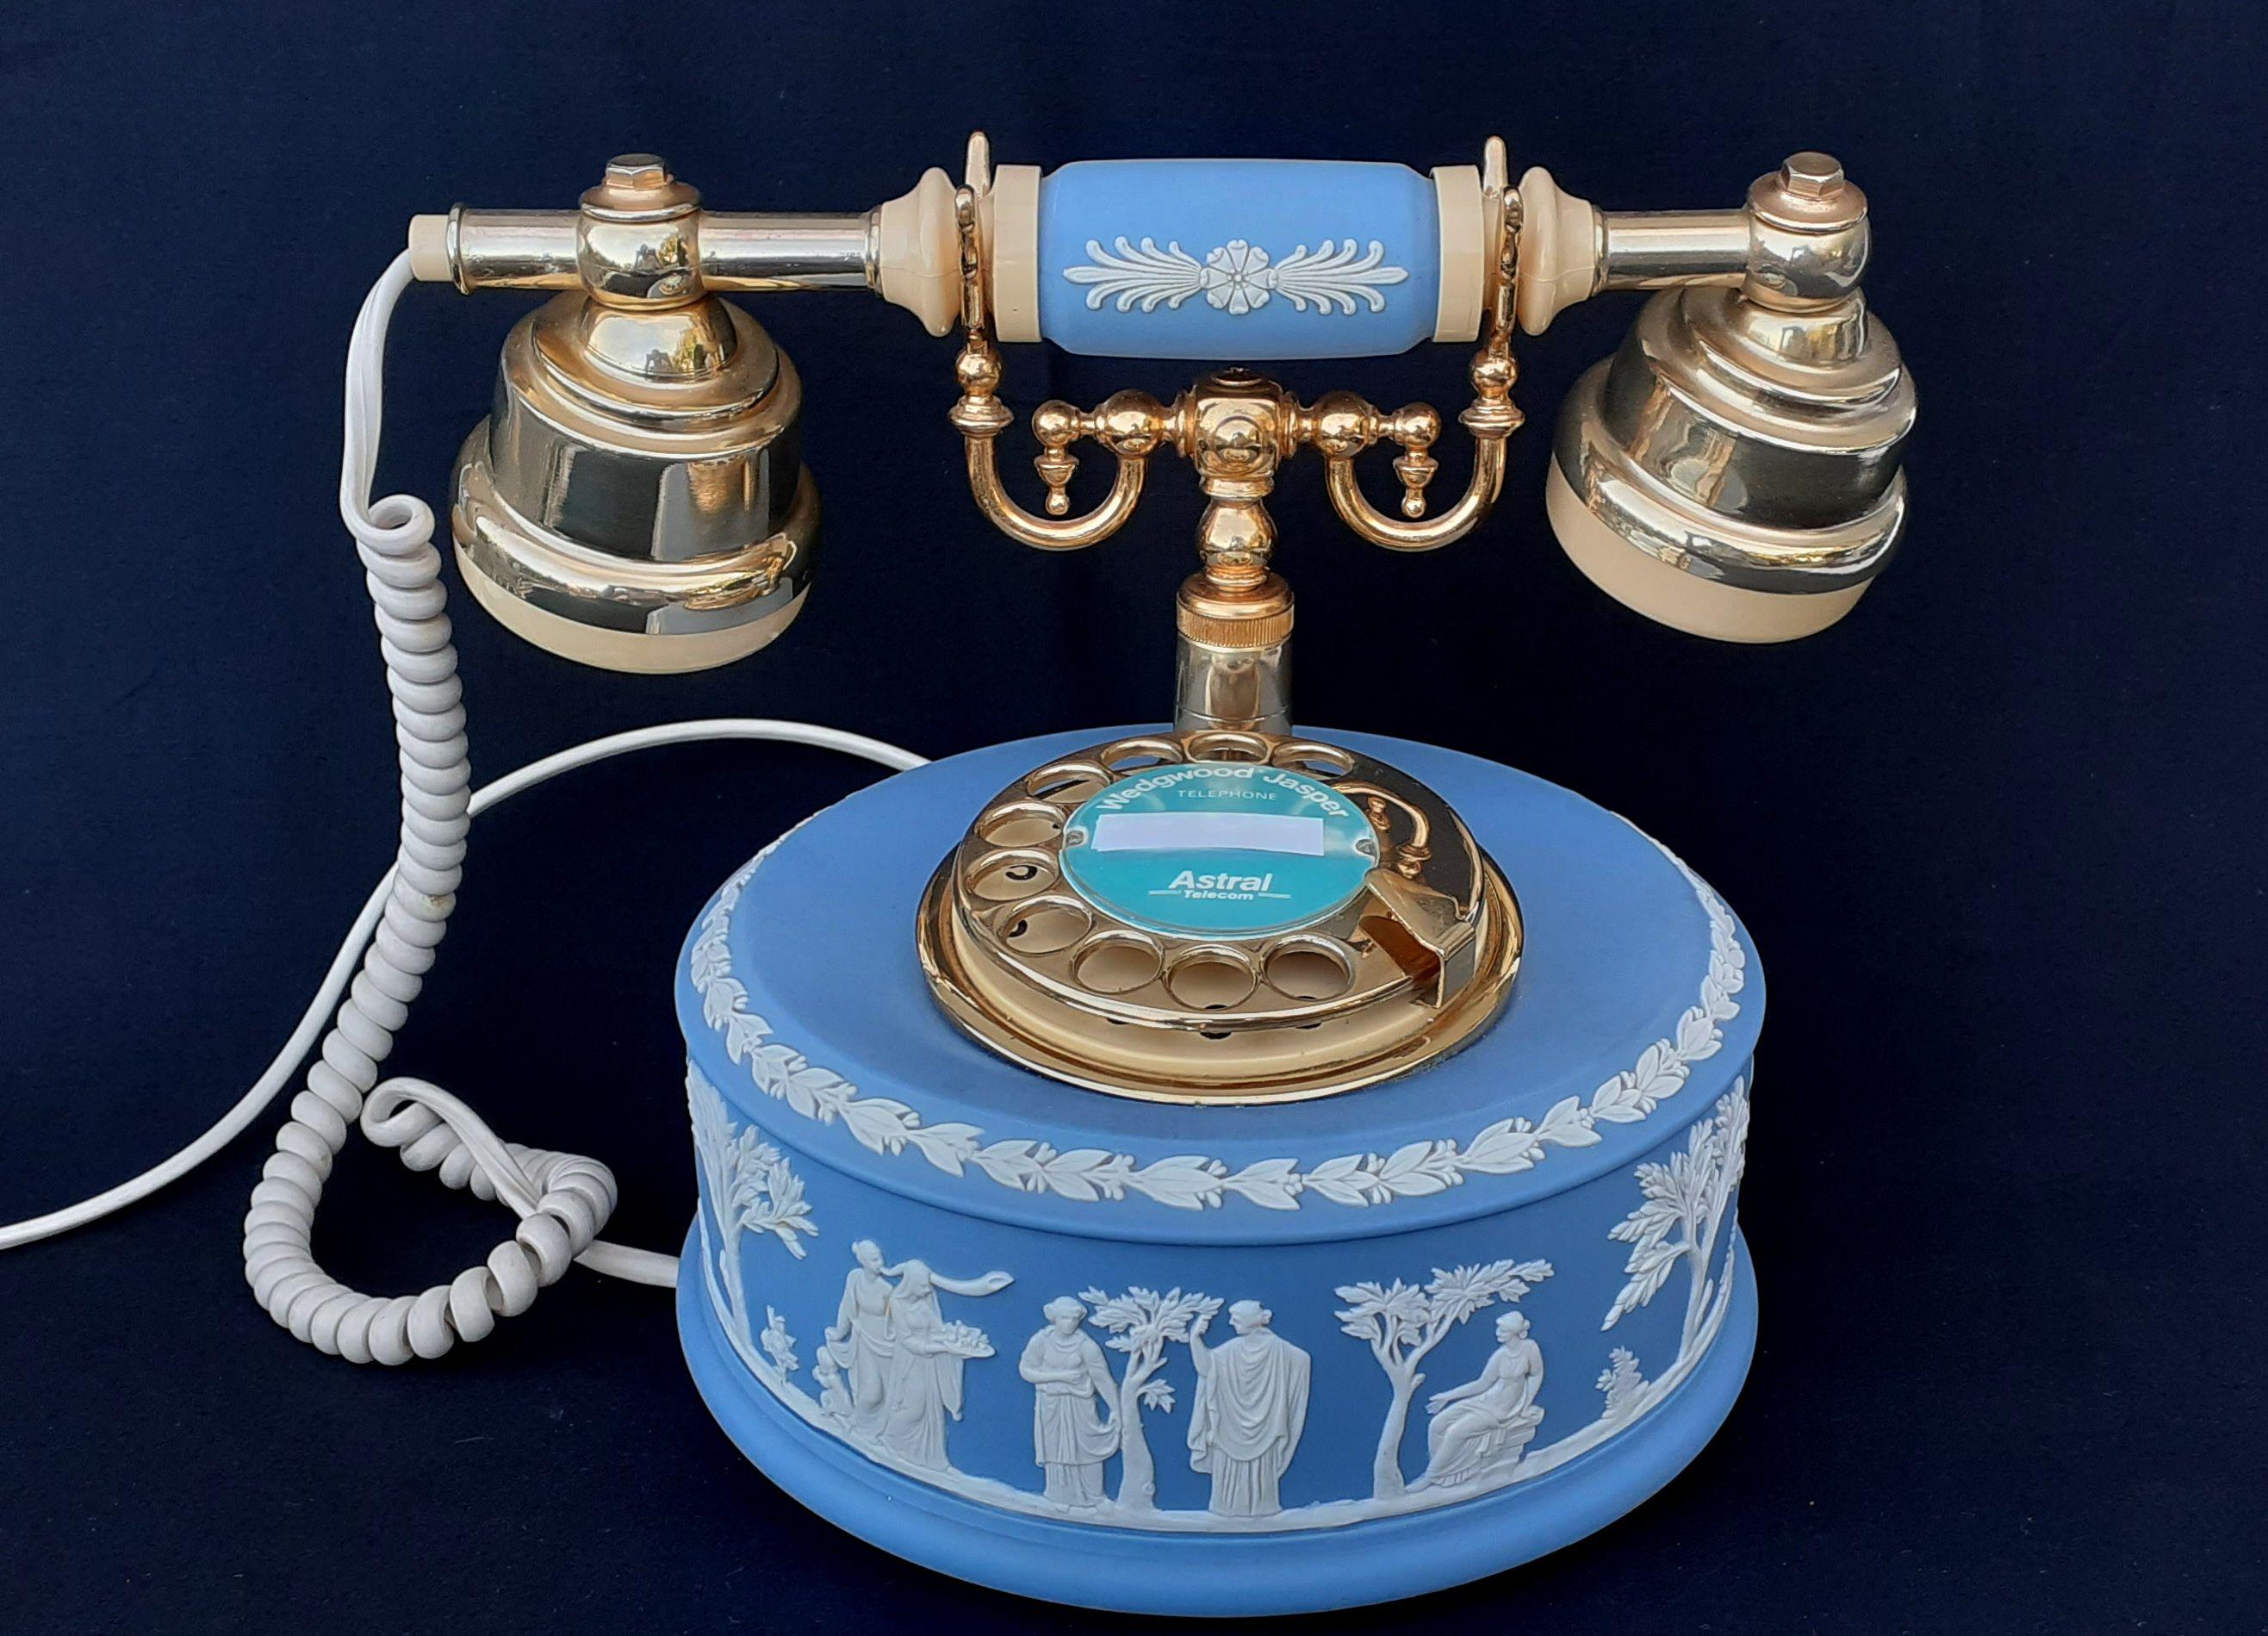 Exceptional and Rare Authentic Wedgwood® Blue Jasper Astral Telephone

The telephone is from the Astral brand, and the decor is from Wedgwood®

Wedgwood® is a Registered Company of British pottery, porcelain and earthenware factory 

This is a real